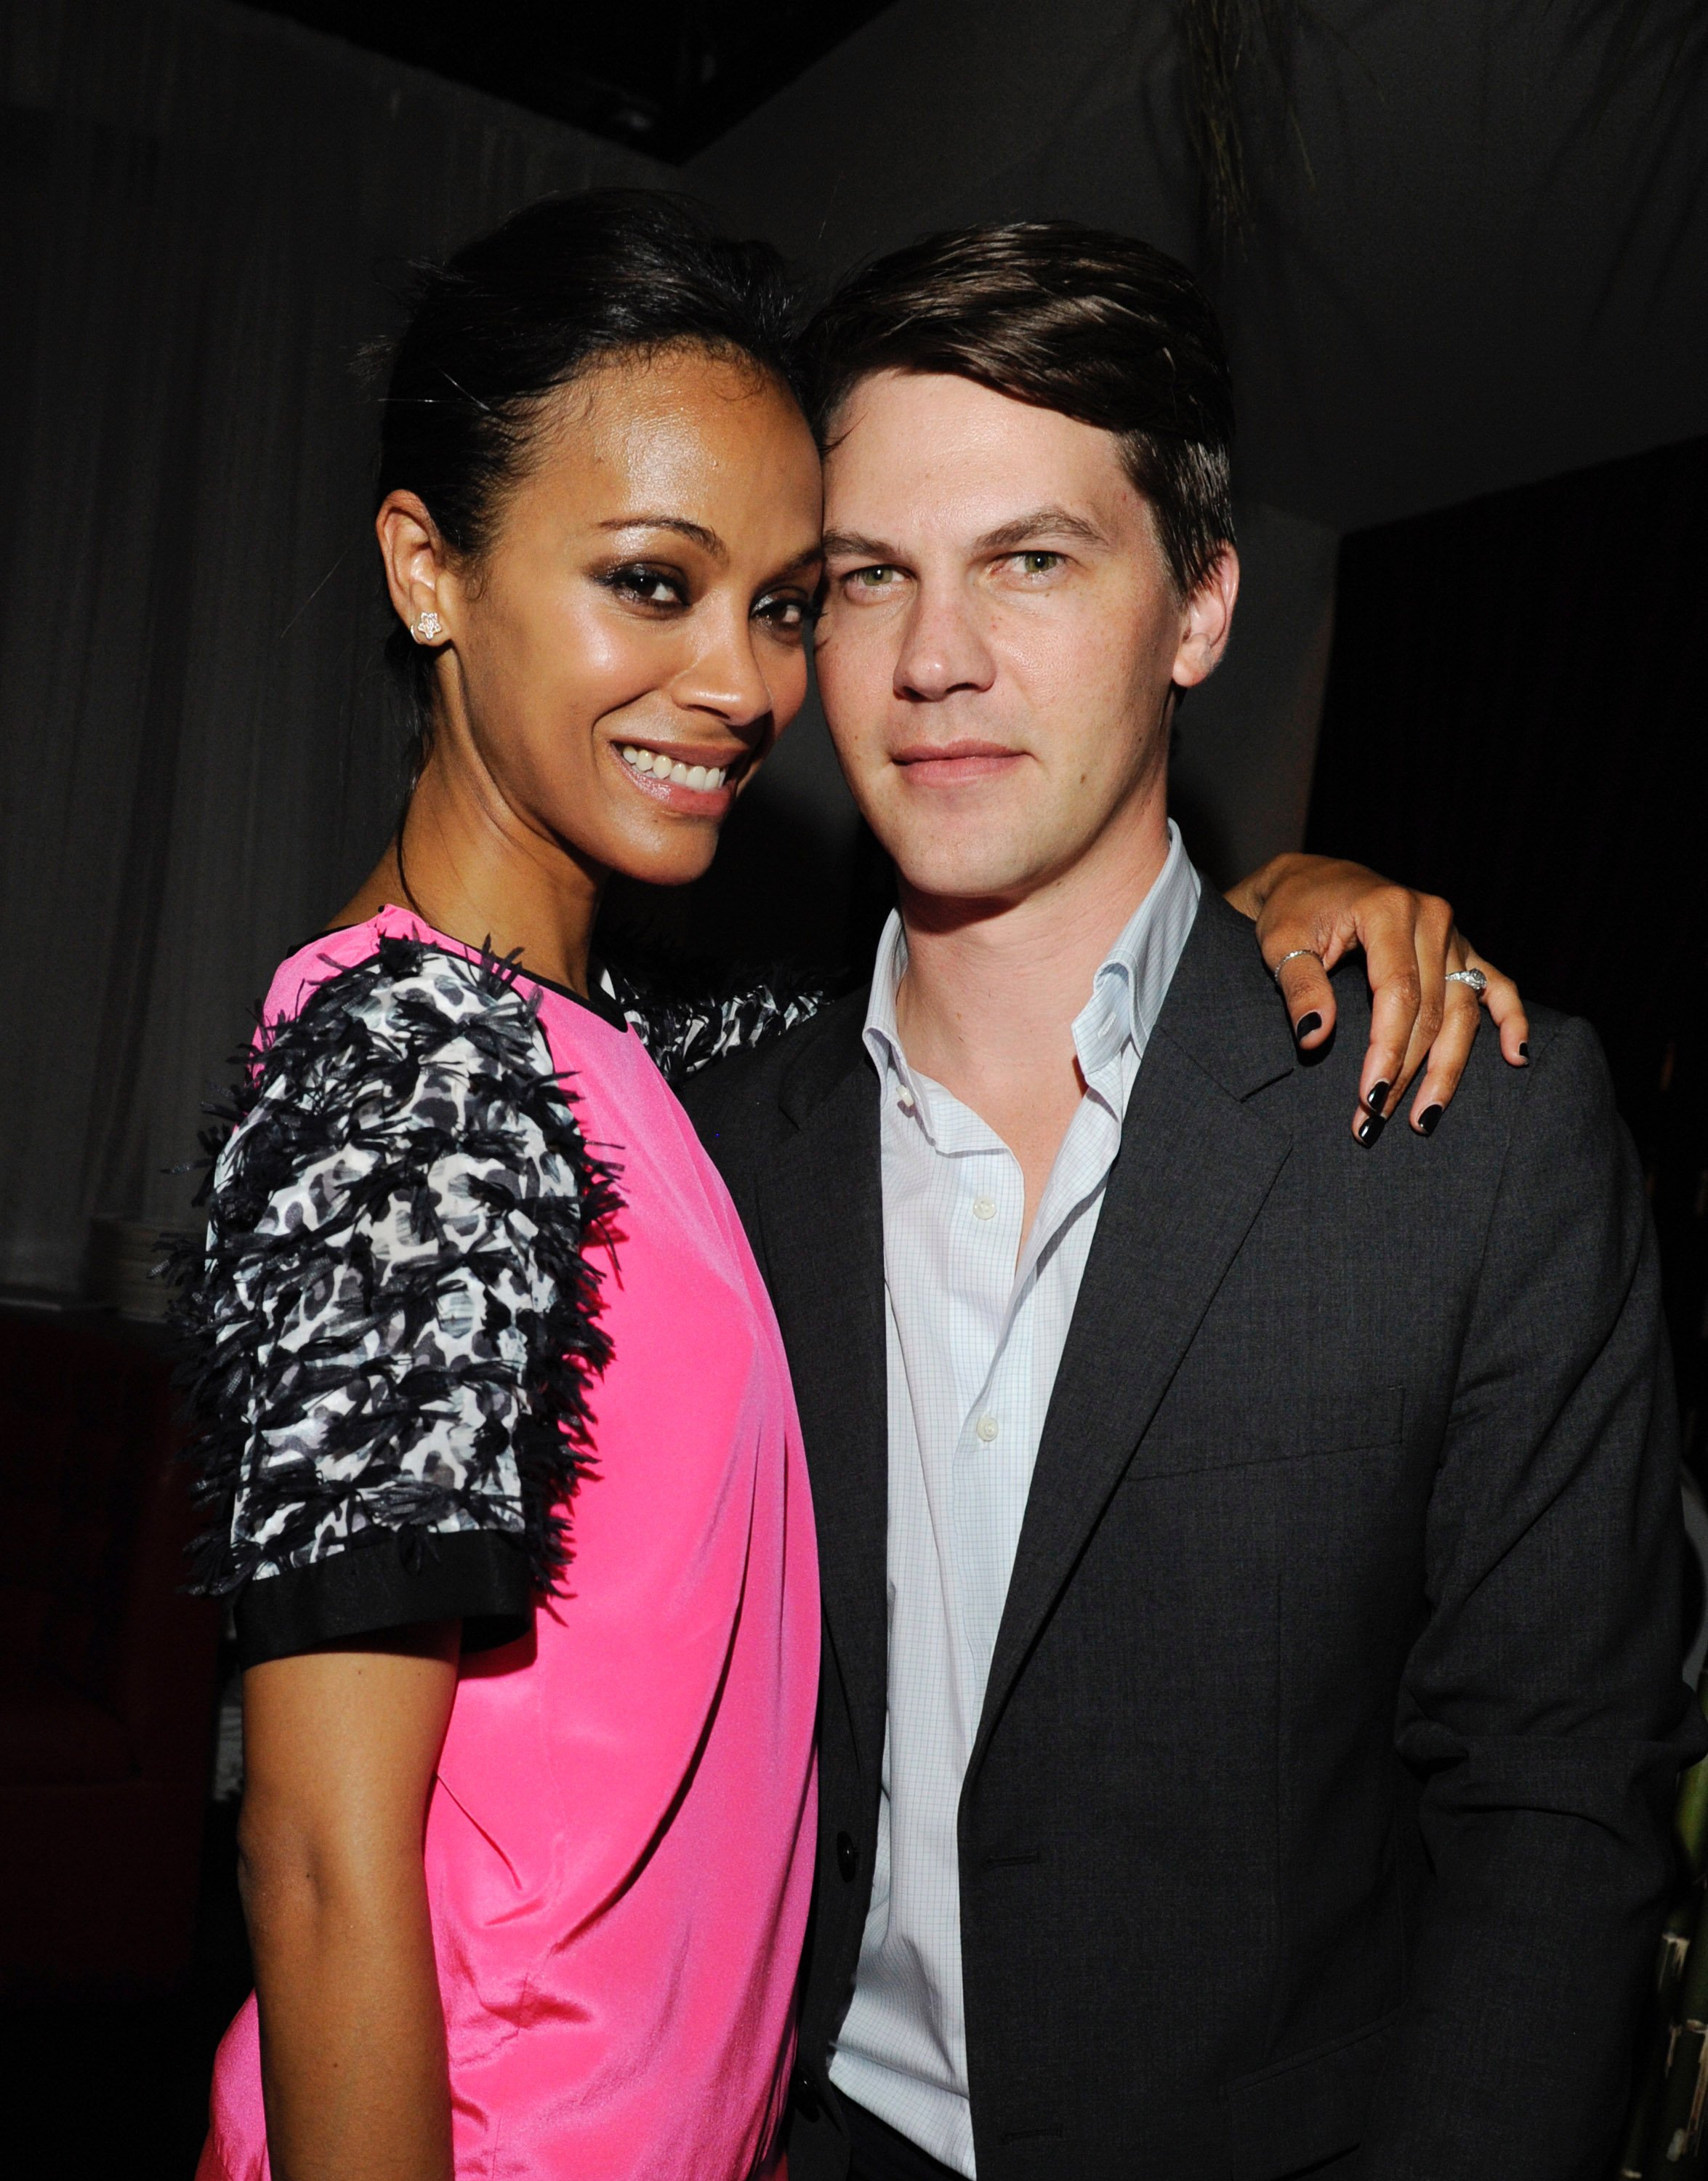 Zoe Saldana and Keith Britton attend the Flaunt Magazine and Gypsy 05 Present "The Neo-Golden Age" at Philippe Chow on August 19, 2011, in Los Angeles, California. | Source: Getty Images